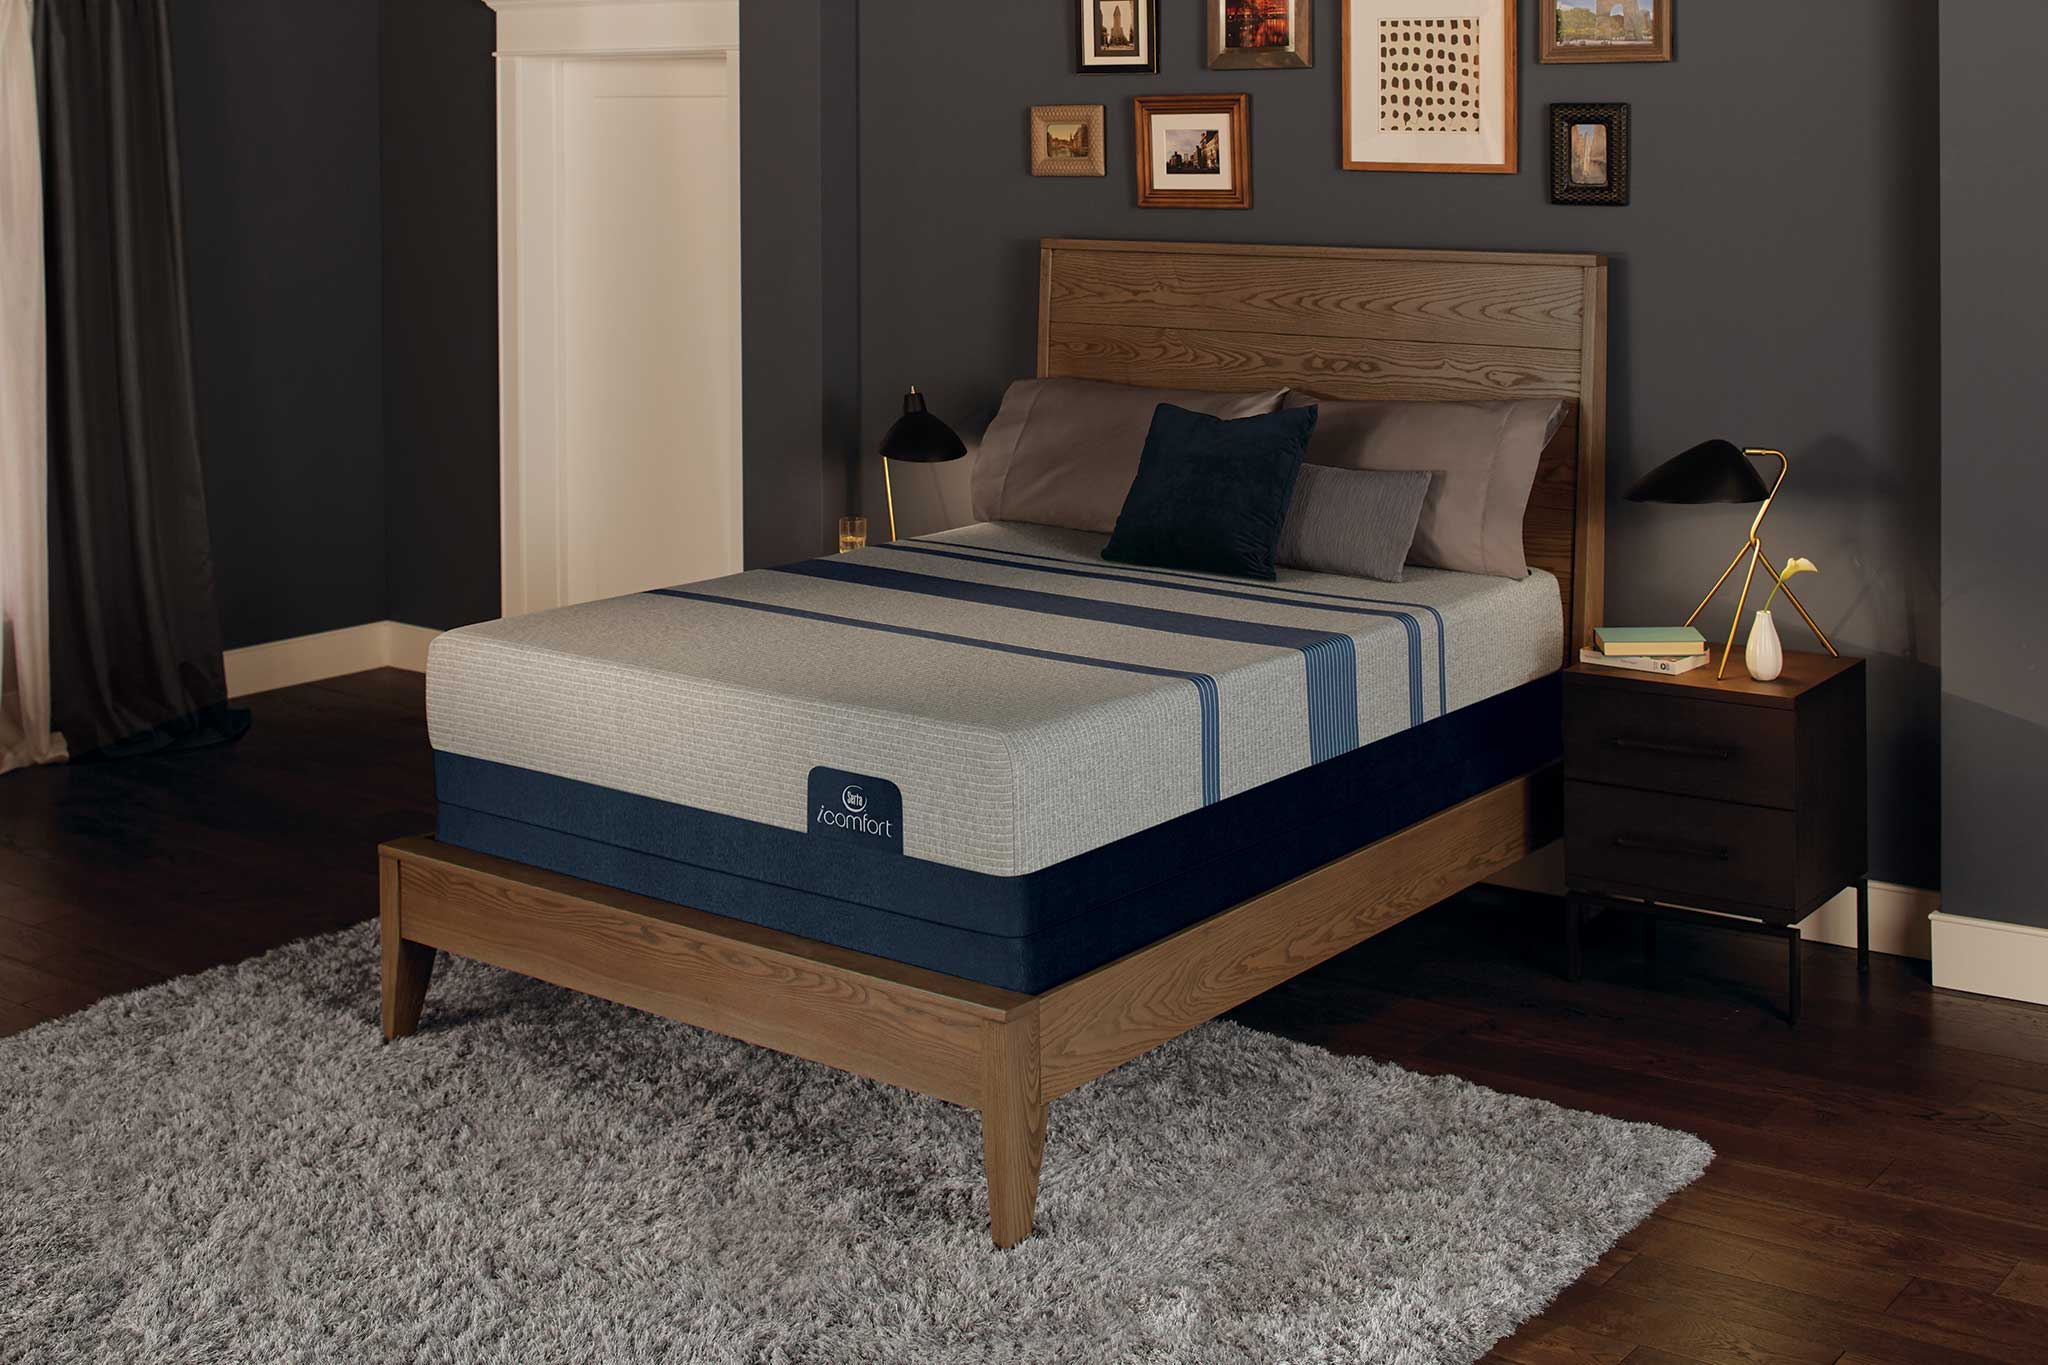 Best Collection of 83+ Stunning blue max 1000 plush king mattress With Many New Styles